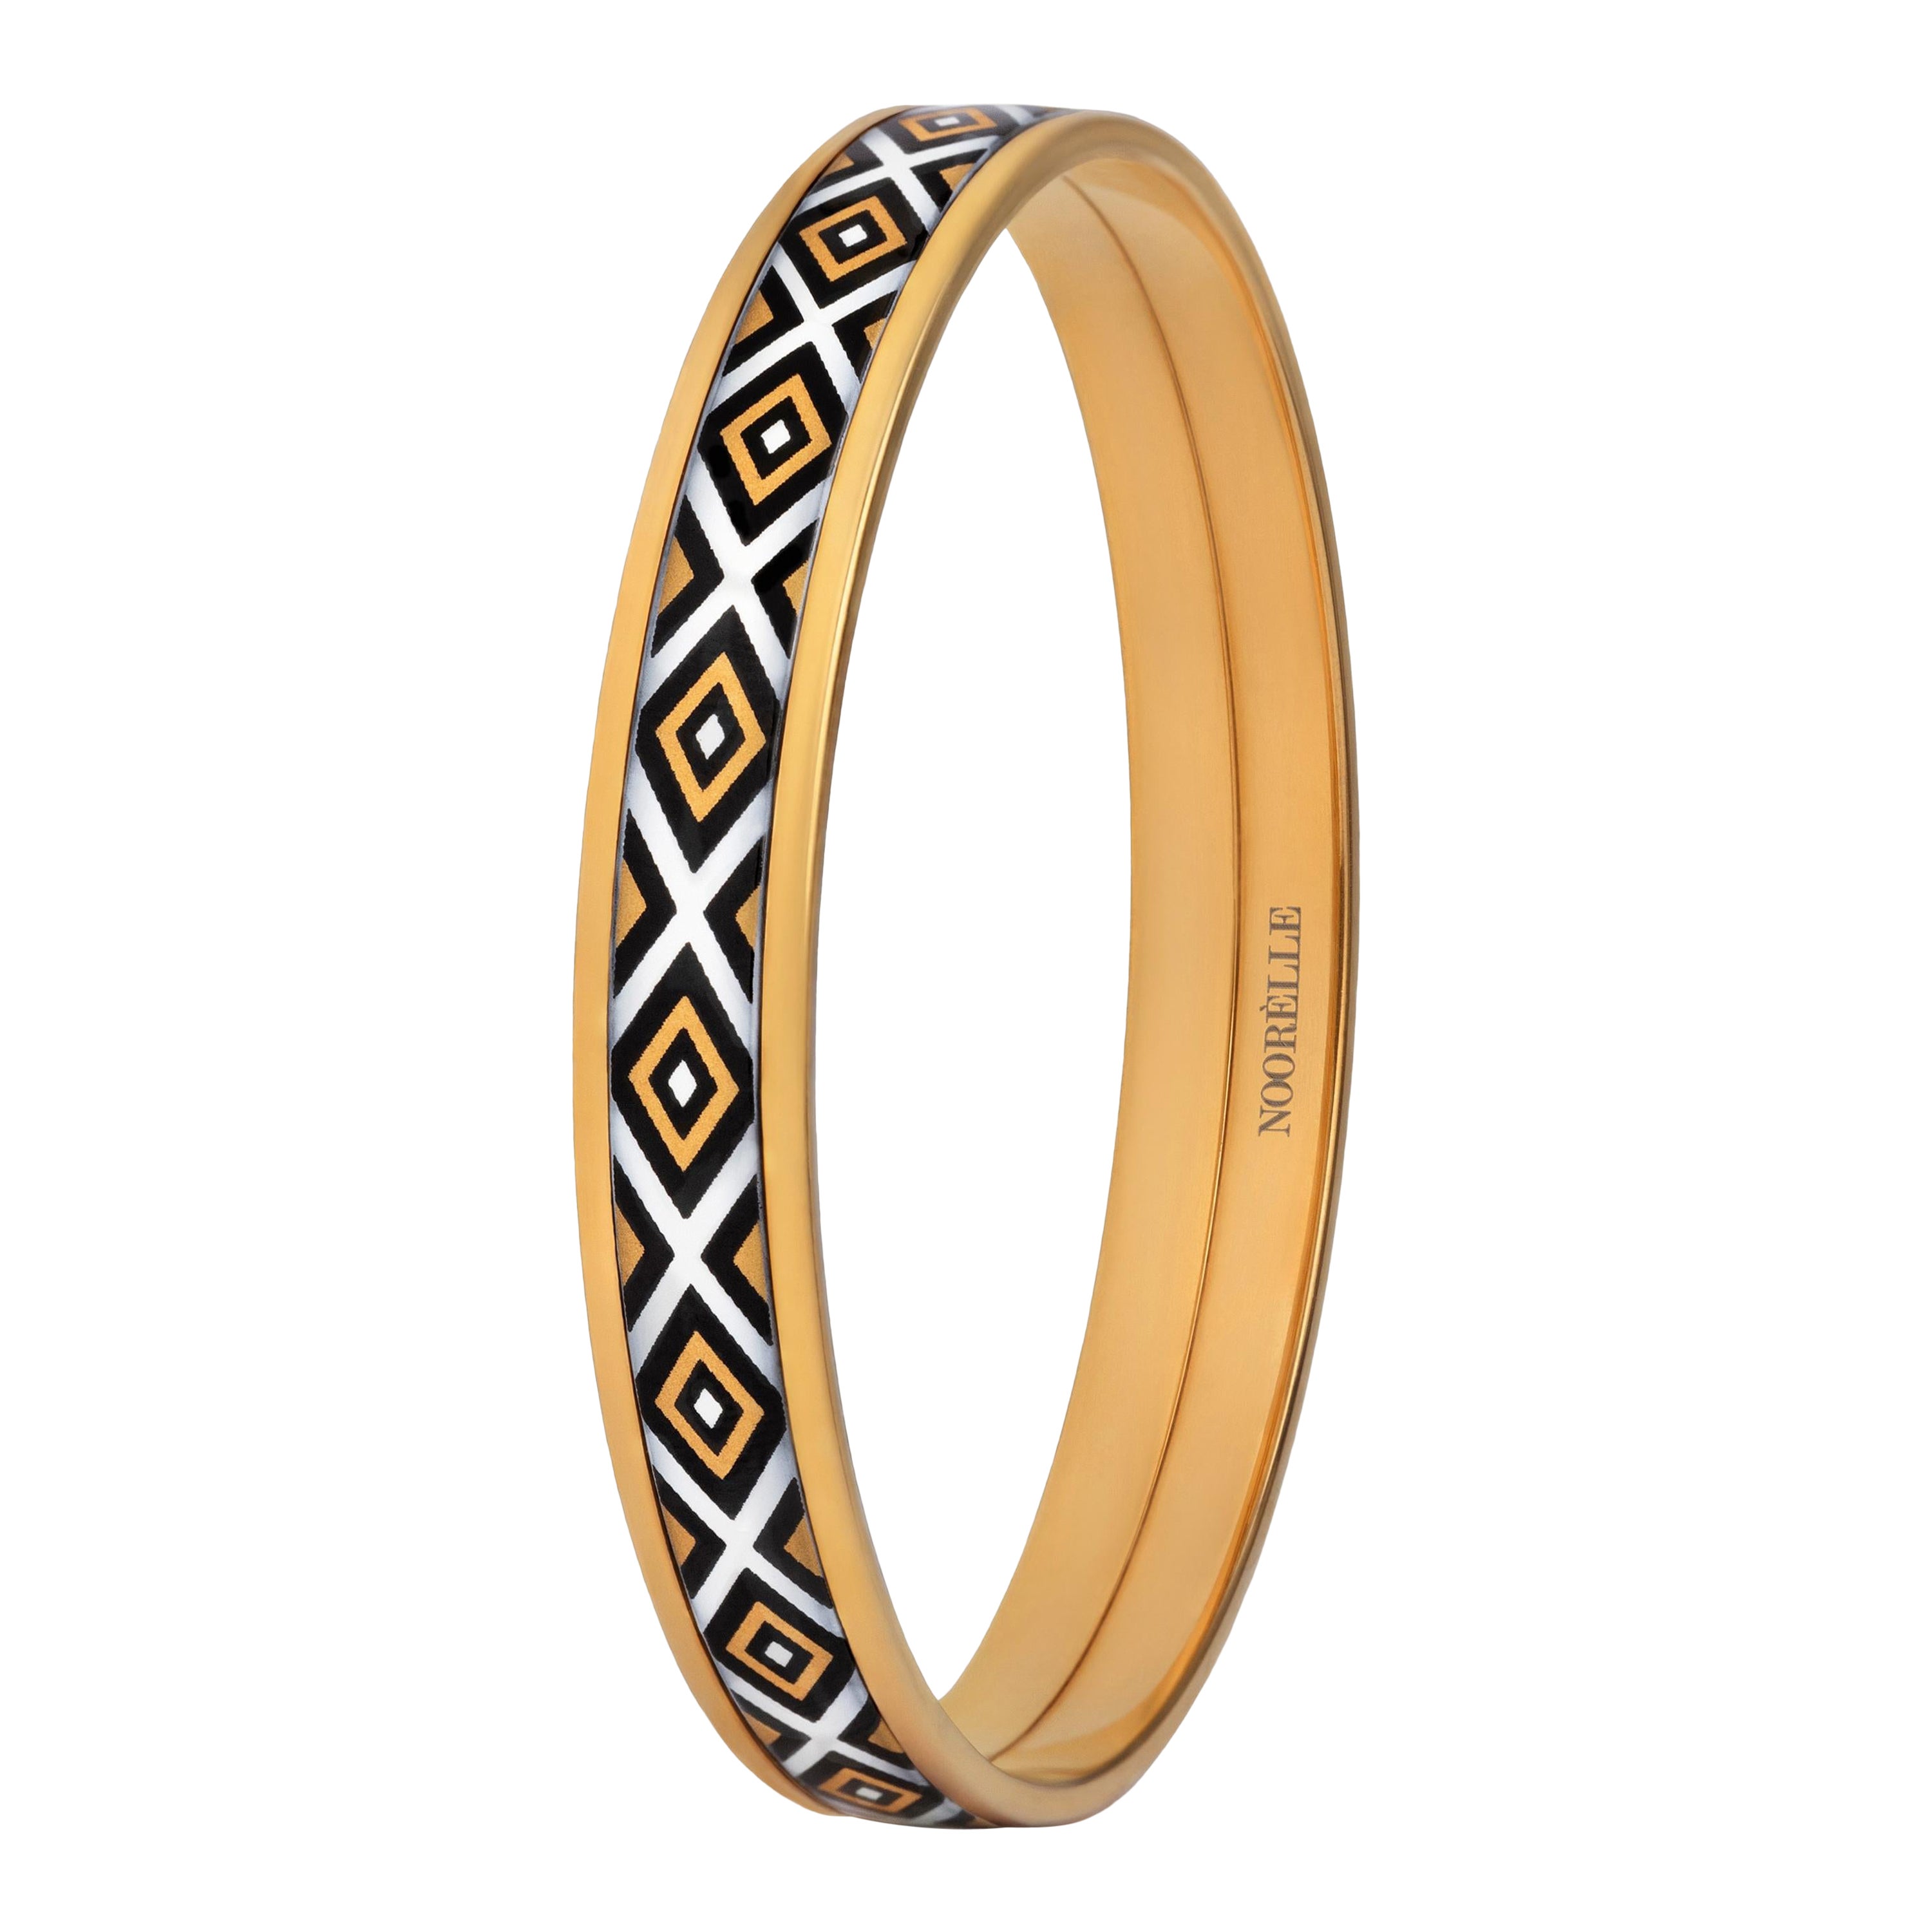 Thin Hand-Painted Gold-Plated Stainless Steel Bangle with Fire Enamel Detail